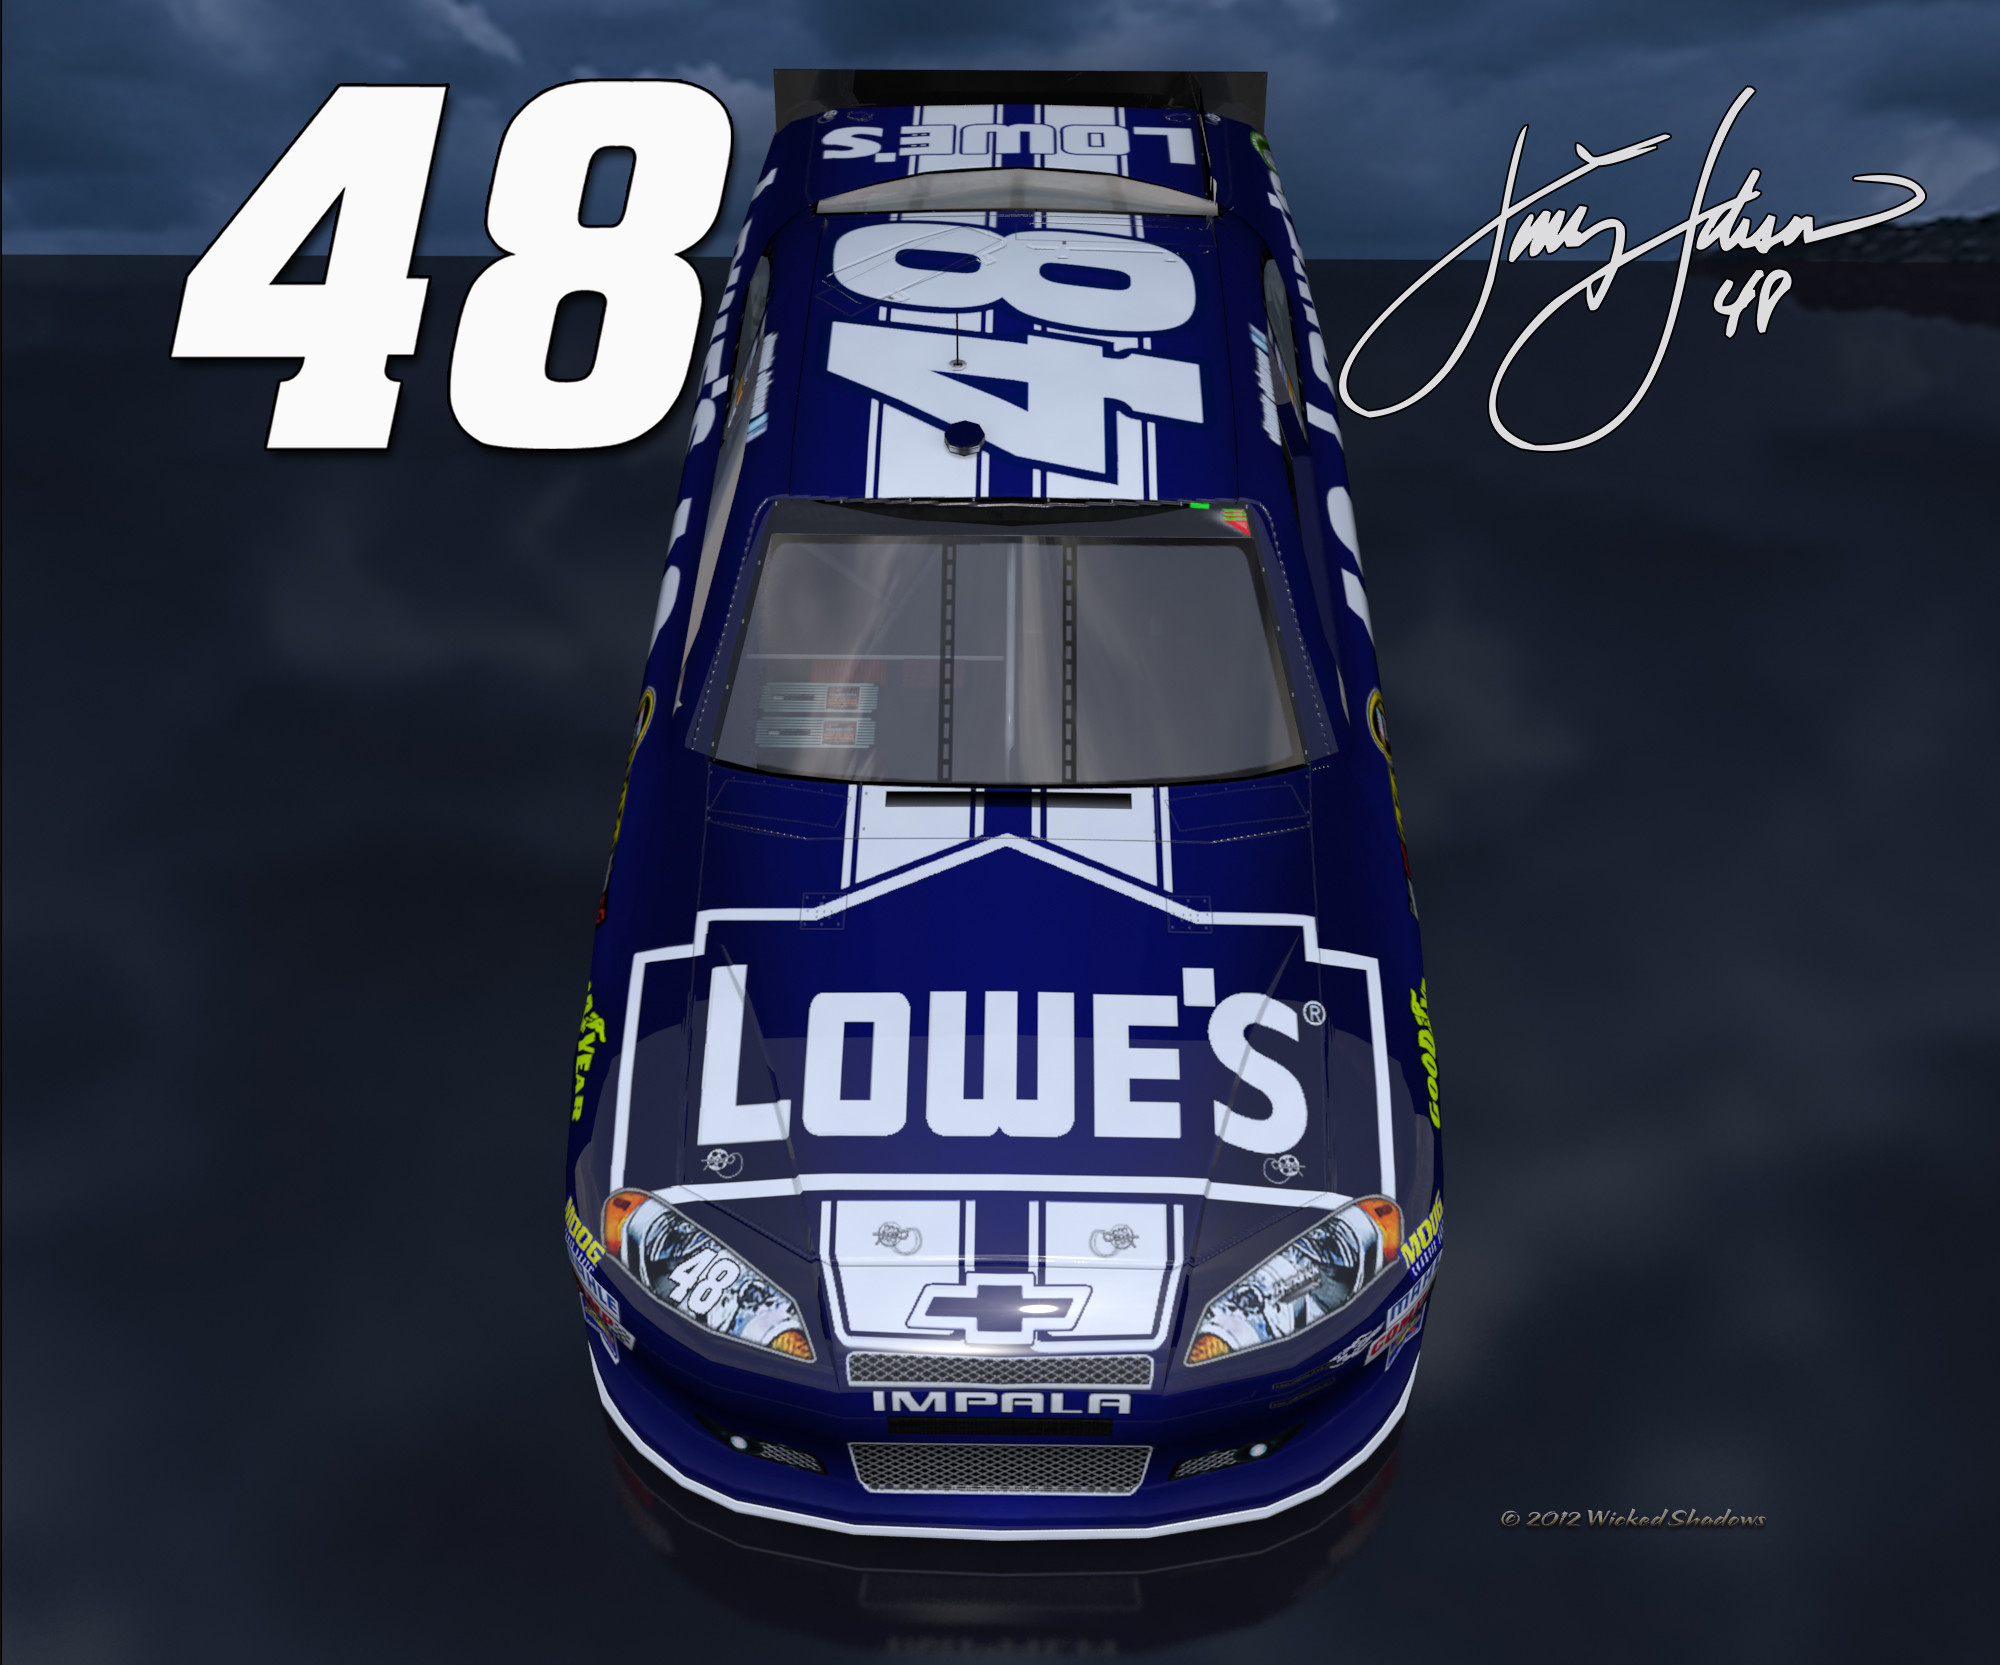 2000x1665 Wallpapers By Wicked Shadows: Jimmie Johnson Blue Lowes 48 .